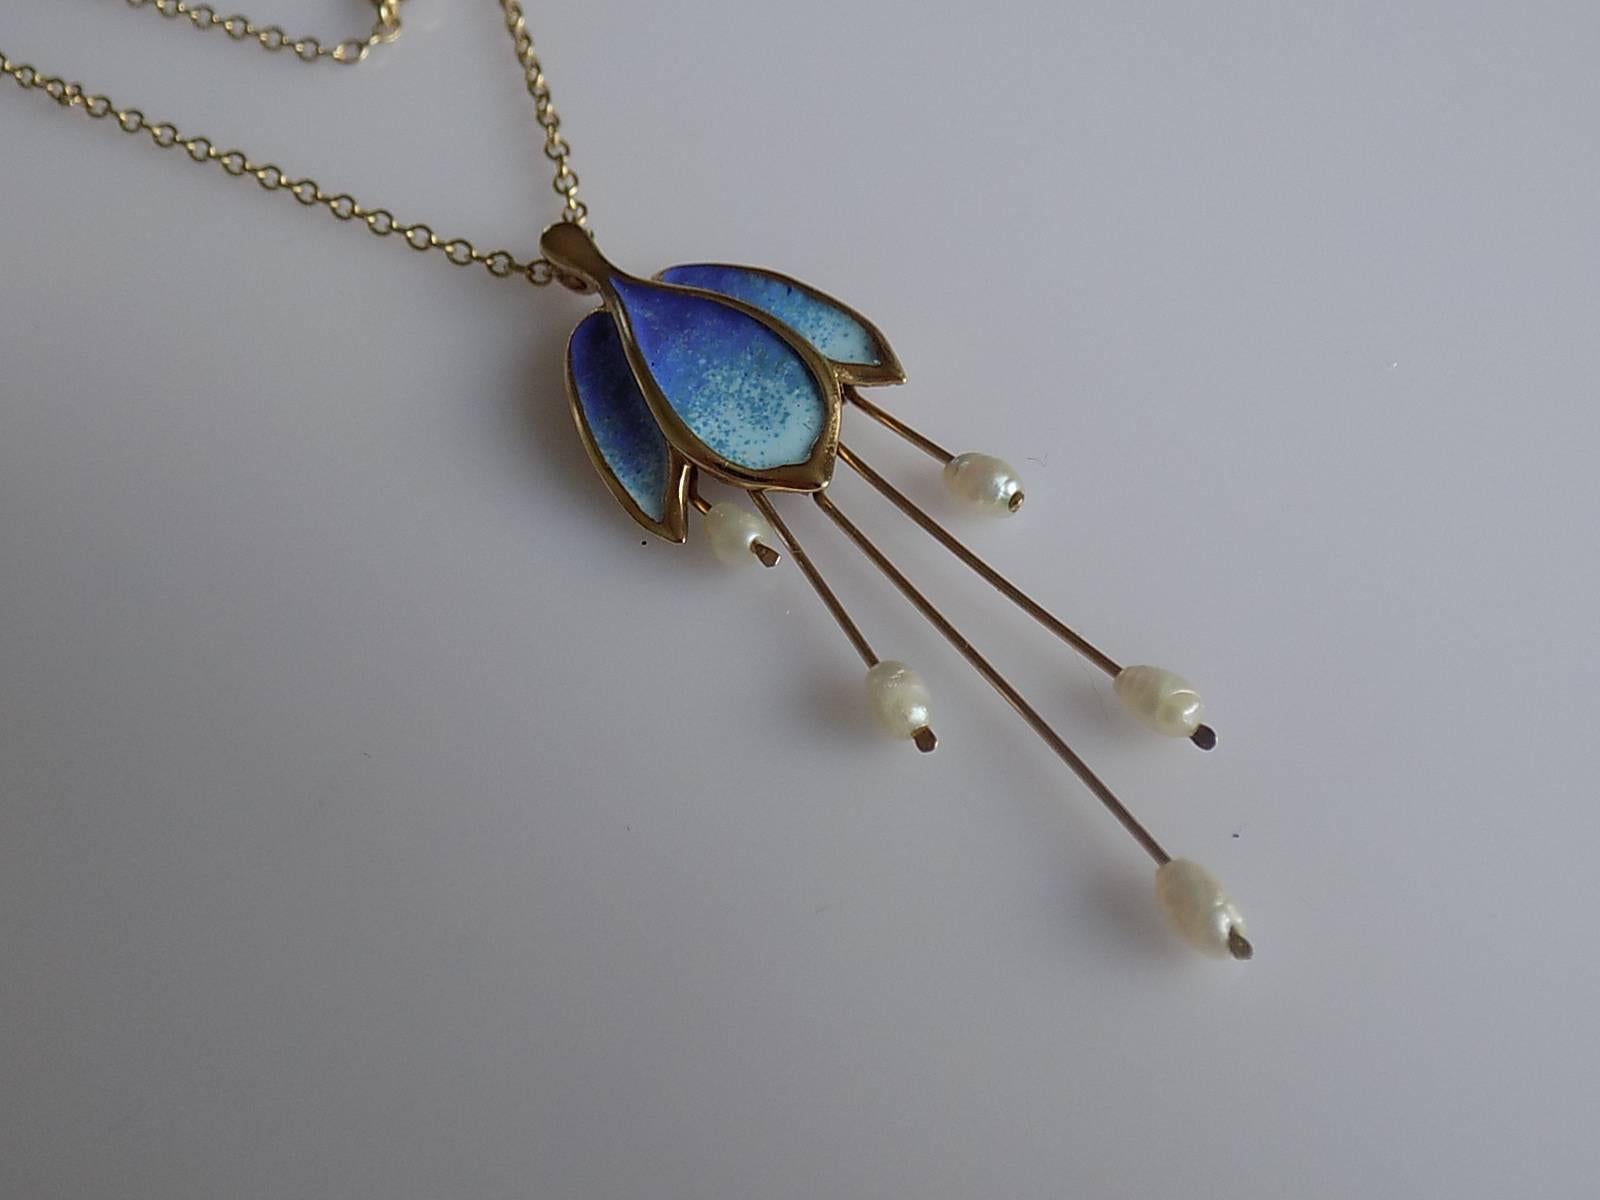 A Gorgeous and Rare Vintage 9 Carat Gold, blue enamel and Pearl Fuchsia pendant by Norman Grant. The pendant complete with a 9 Carat Gold chain. English origin.
Pendant 56mm x 16mm.
Length of the chain 16 1/2".
Fully hallmarked for 9 Carat Gold